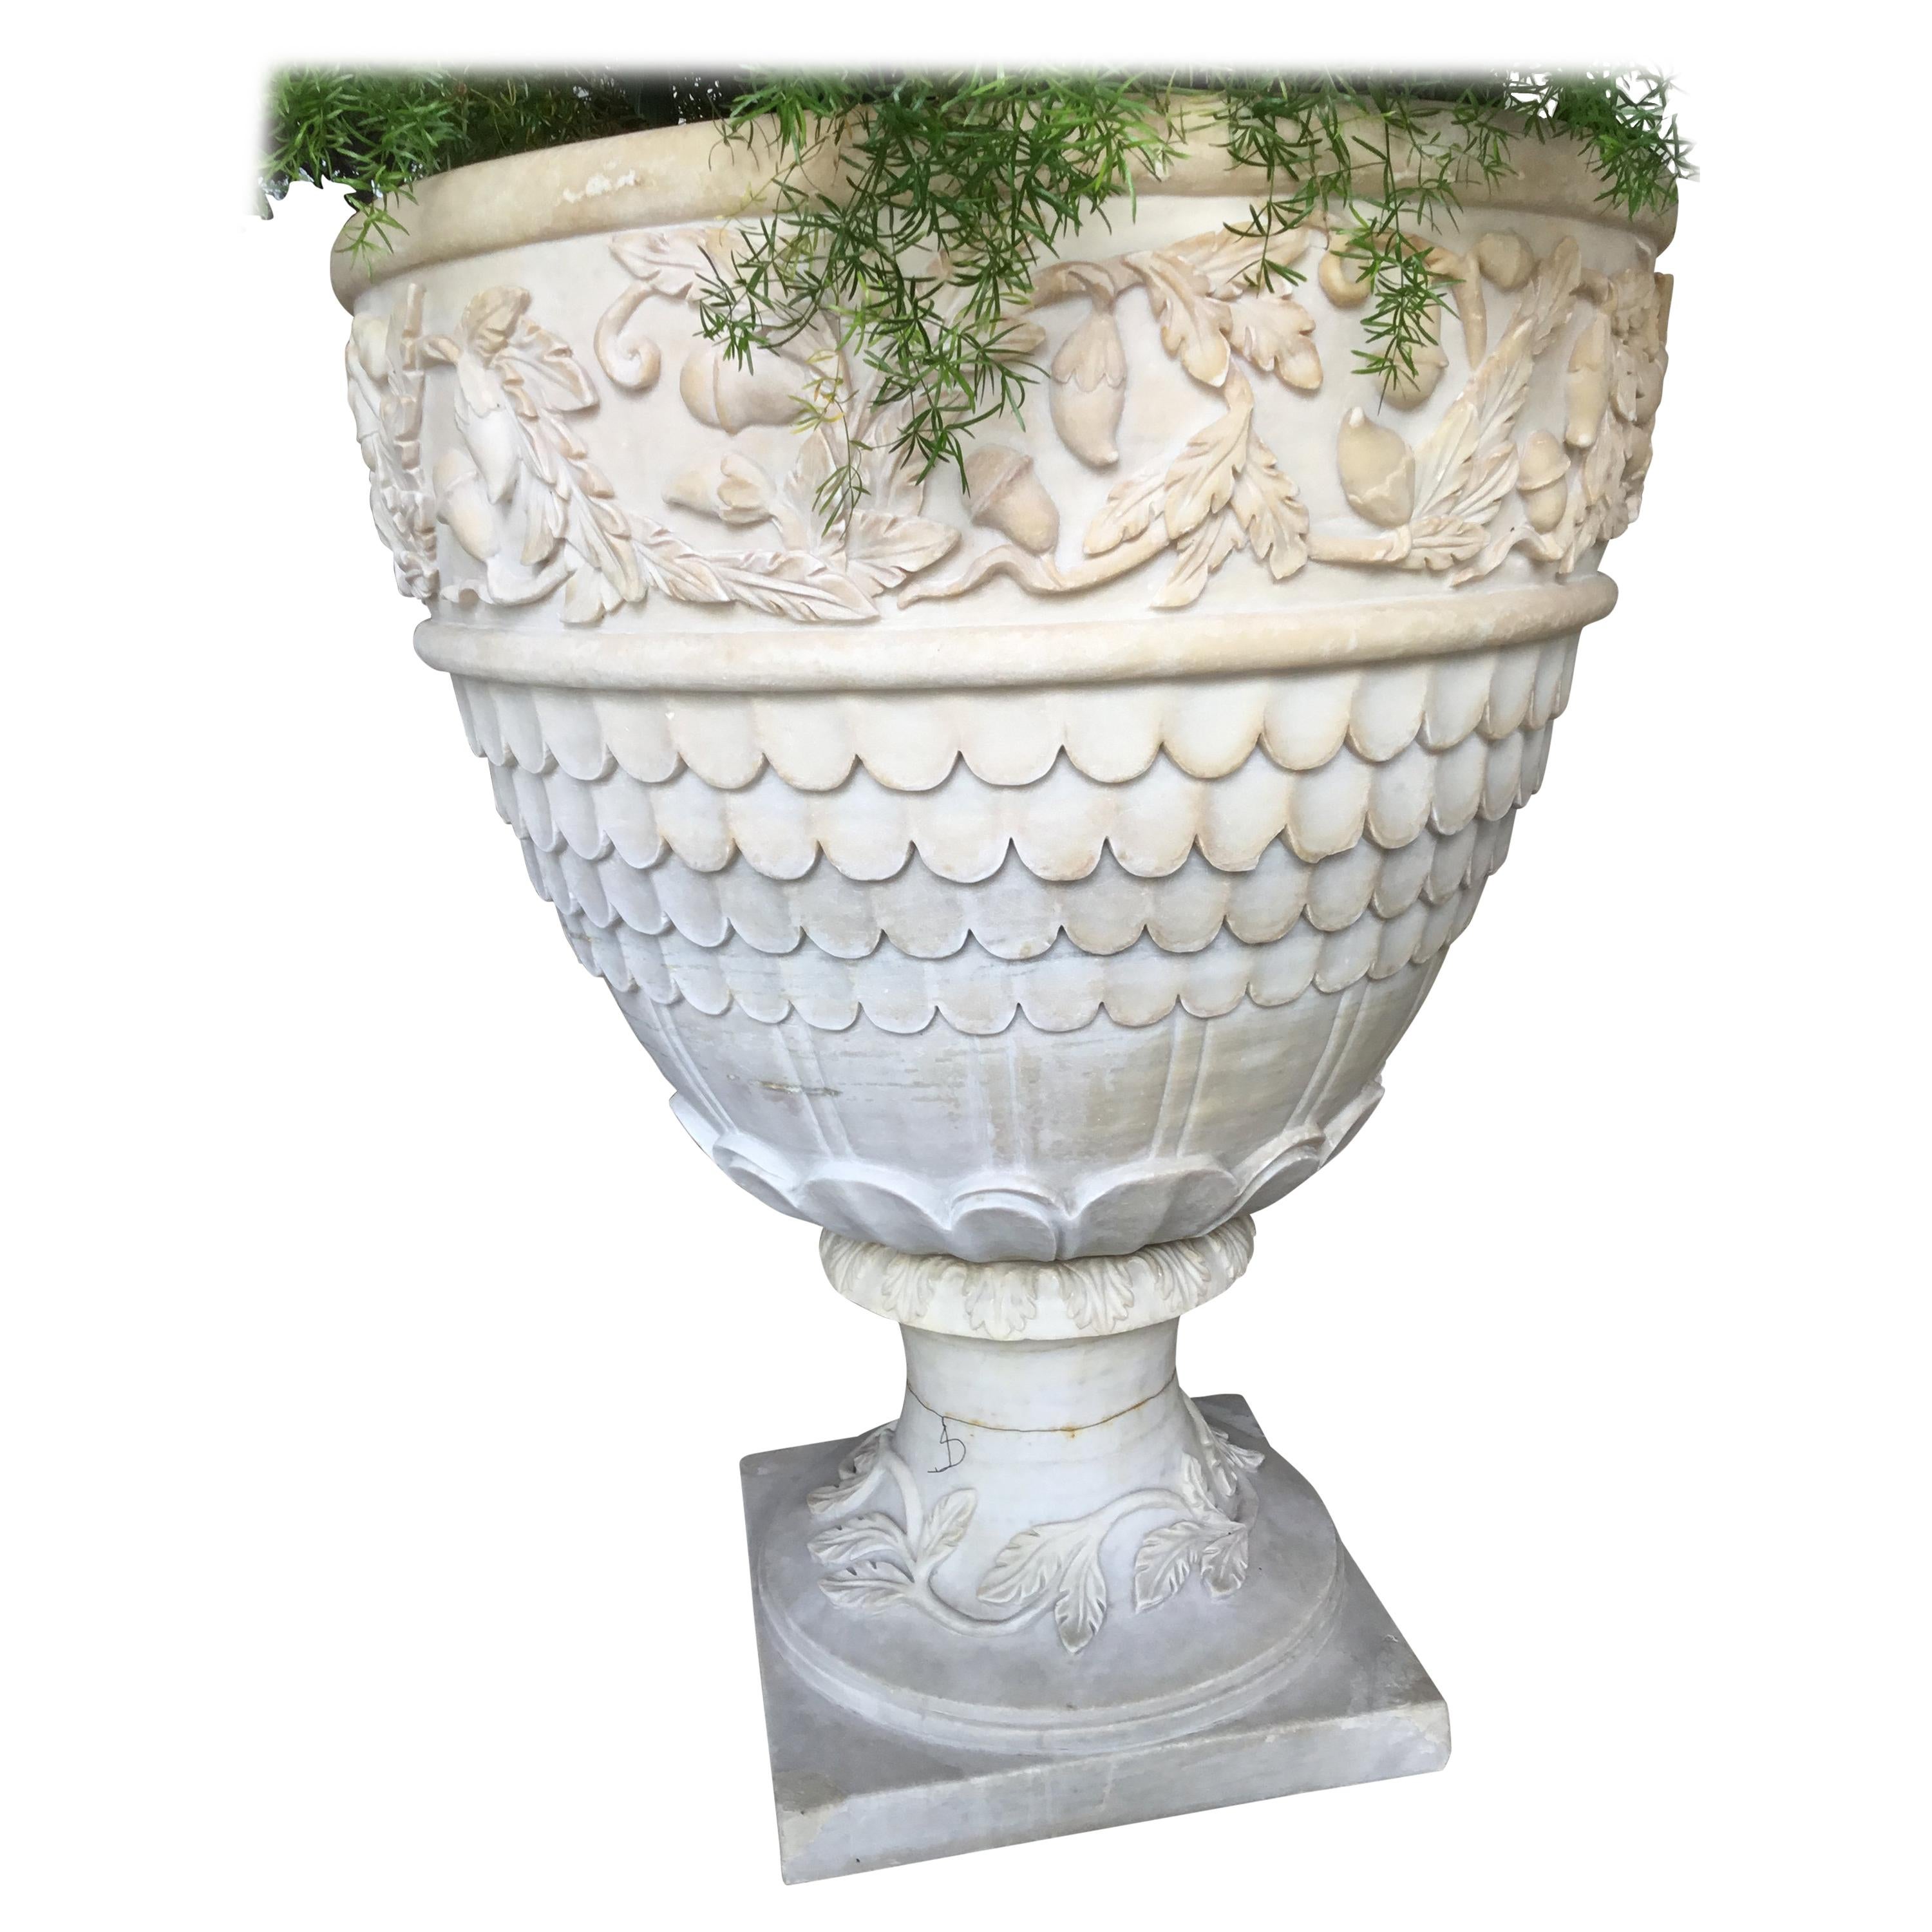 Pair of Large Grand Scale White Hand Carved Carrara Marble Garden Planters